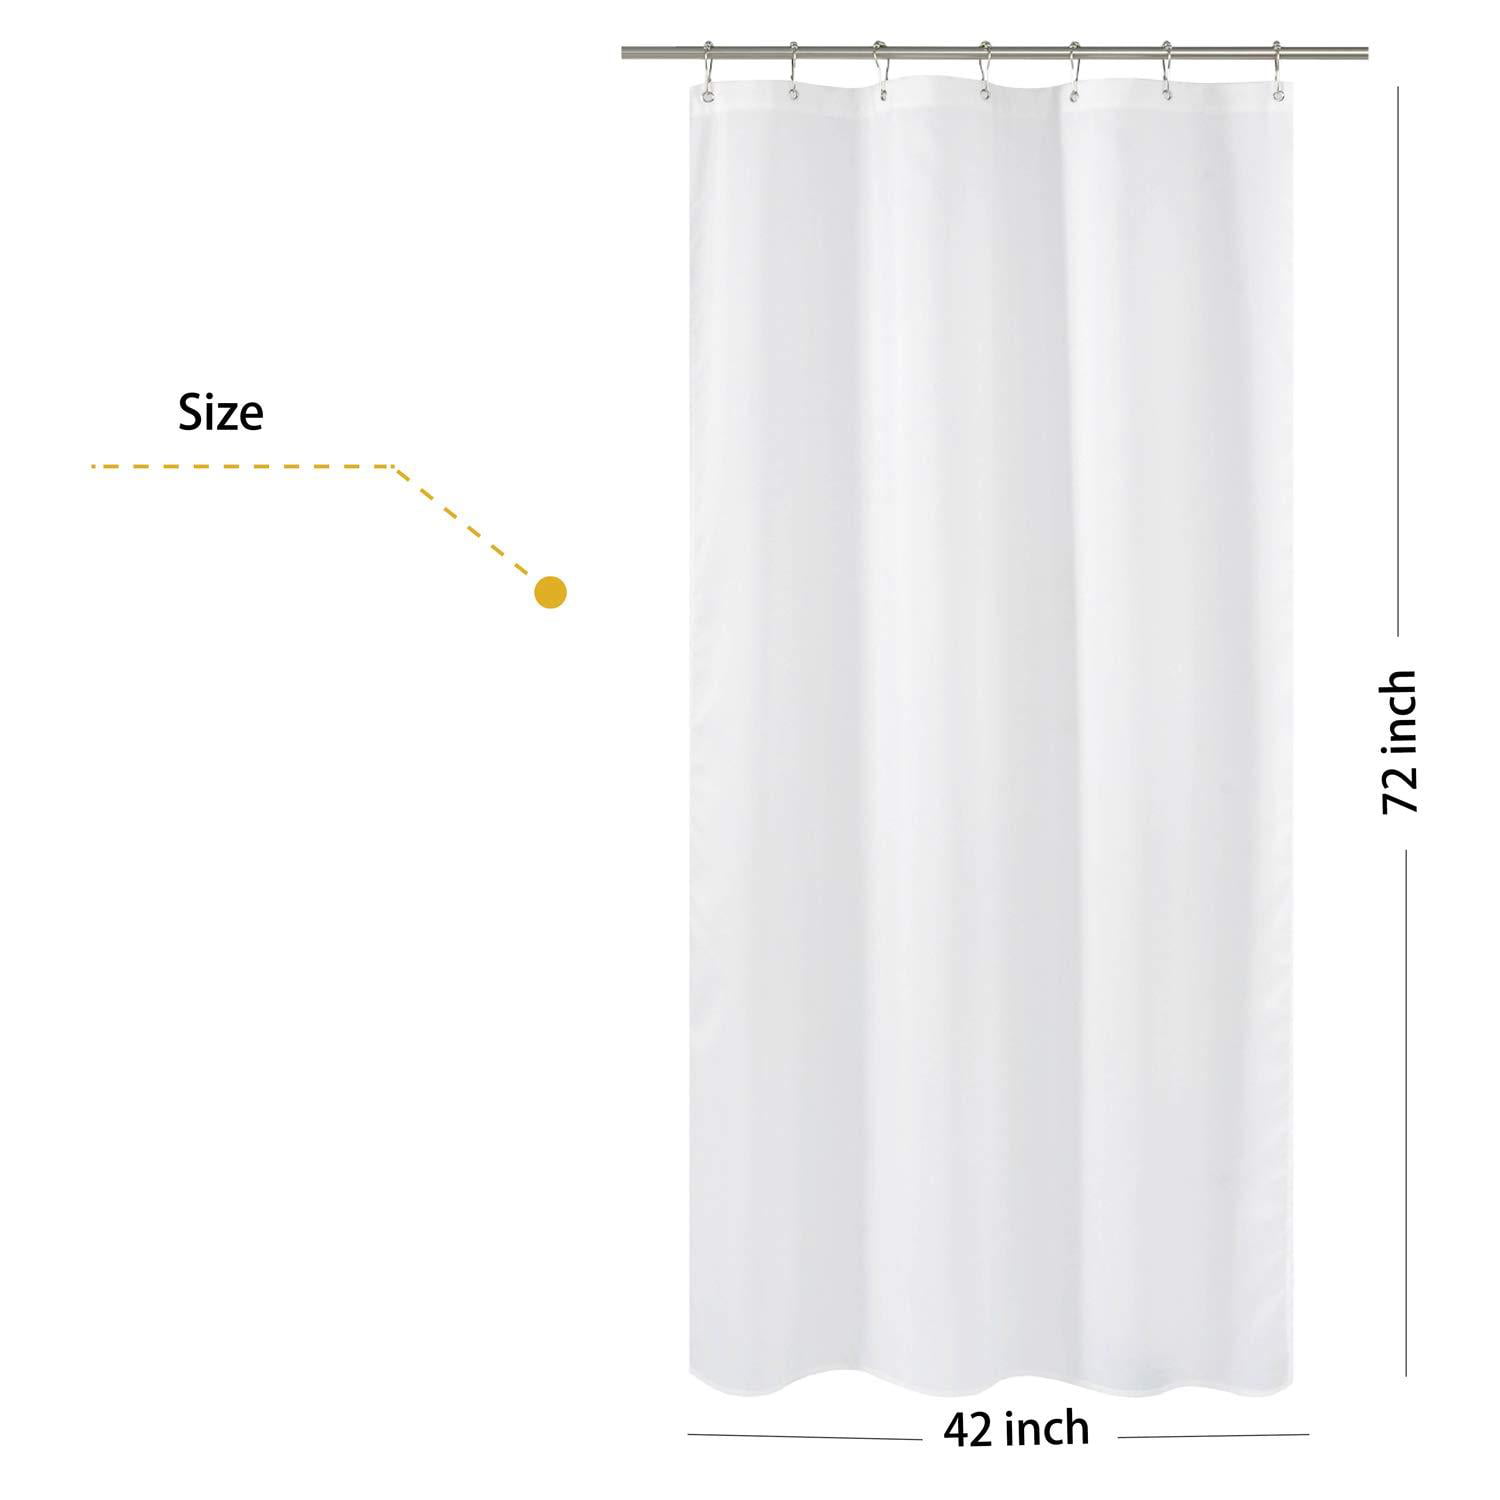 Fabric Shower Curtain Liner Stall Size, Do They Make Shower Curtains Longer Than 72 Inches